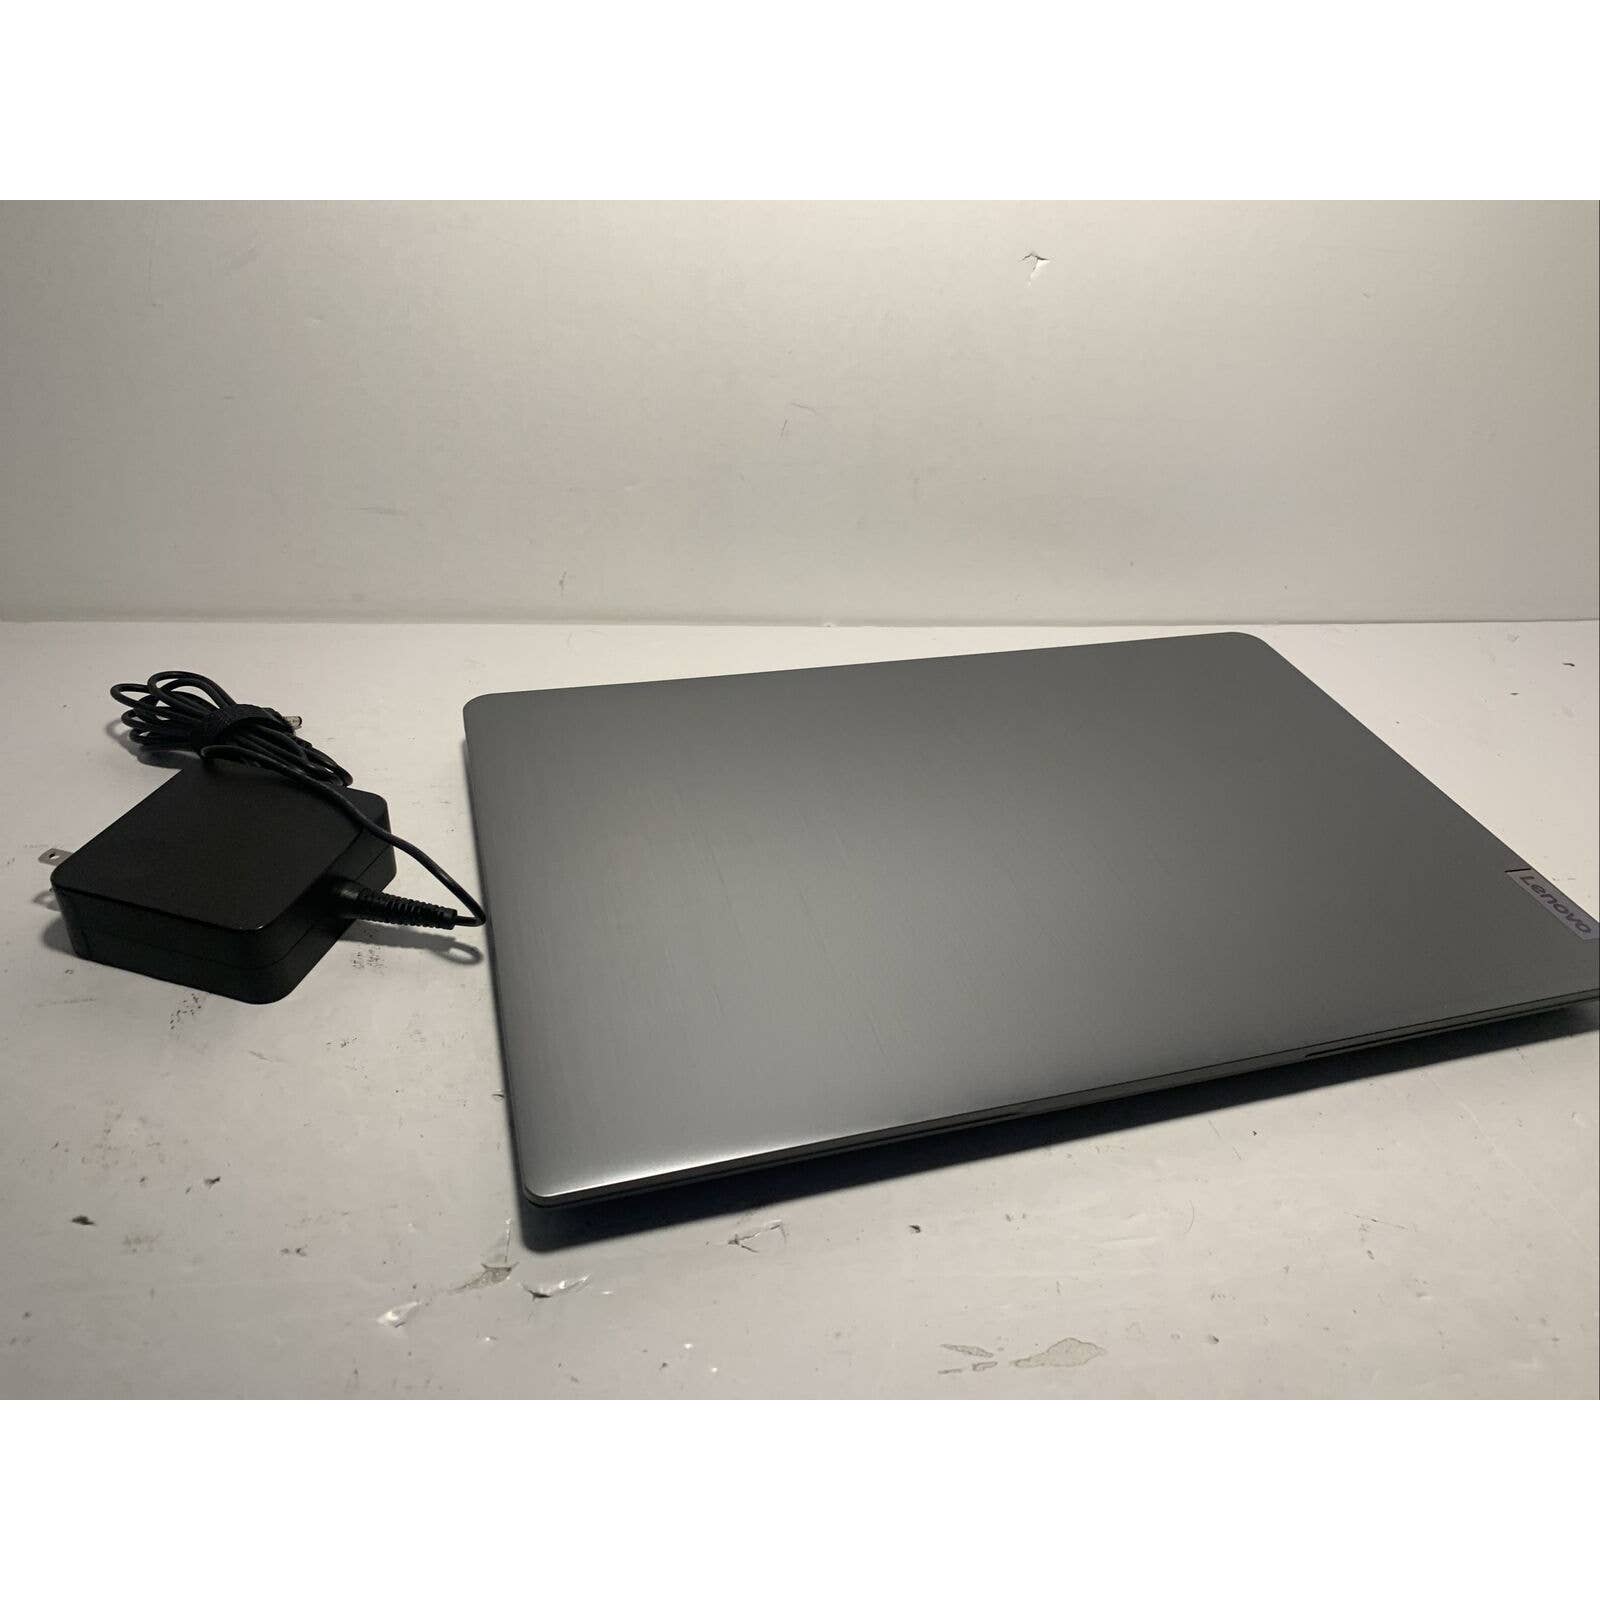 Lenovo IdeaPad 3 15ITL06 82H801EJUS 15.6" Notebook 256G SSD Full HD Branzoe Retail Outlet